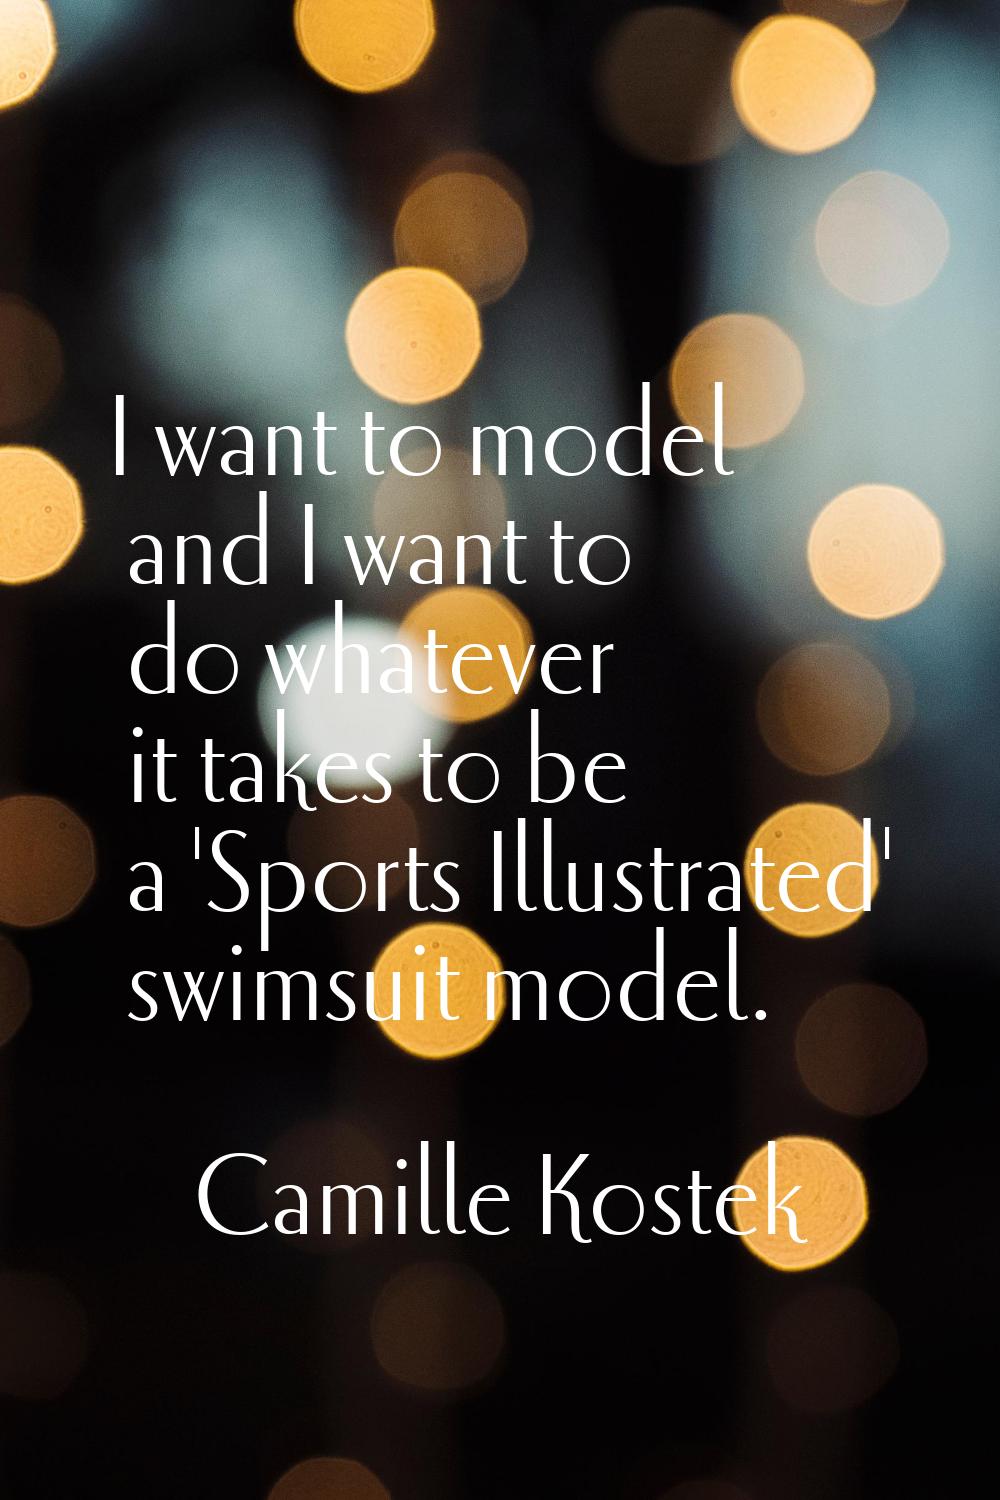 I want to model and I want to do whatever it takes to be a 'Sports Illustrated' swimsuit model.